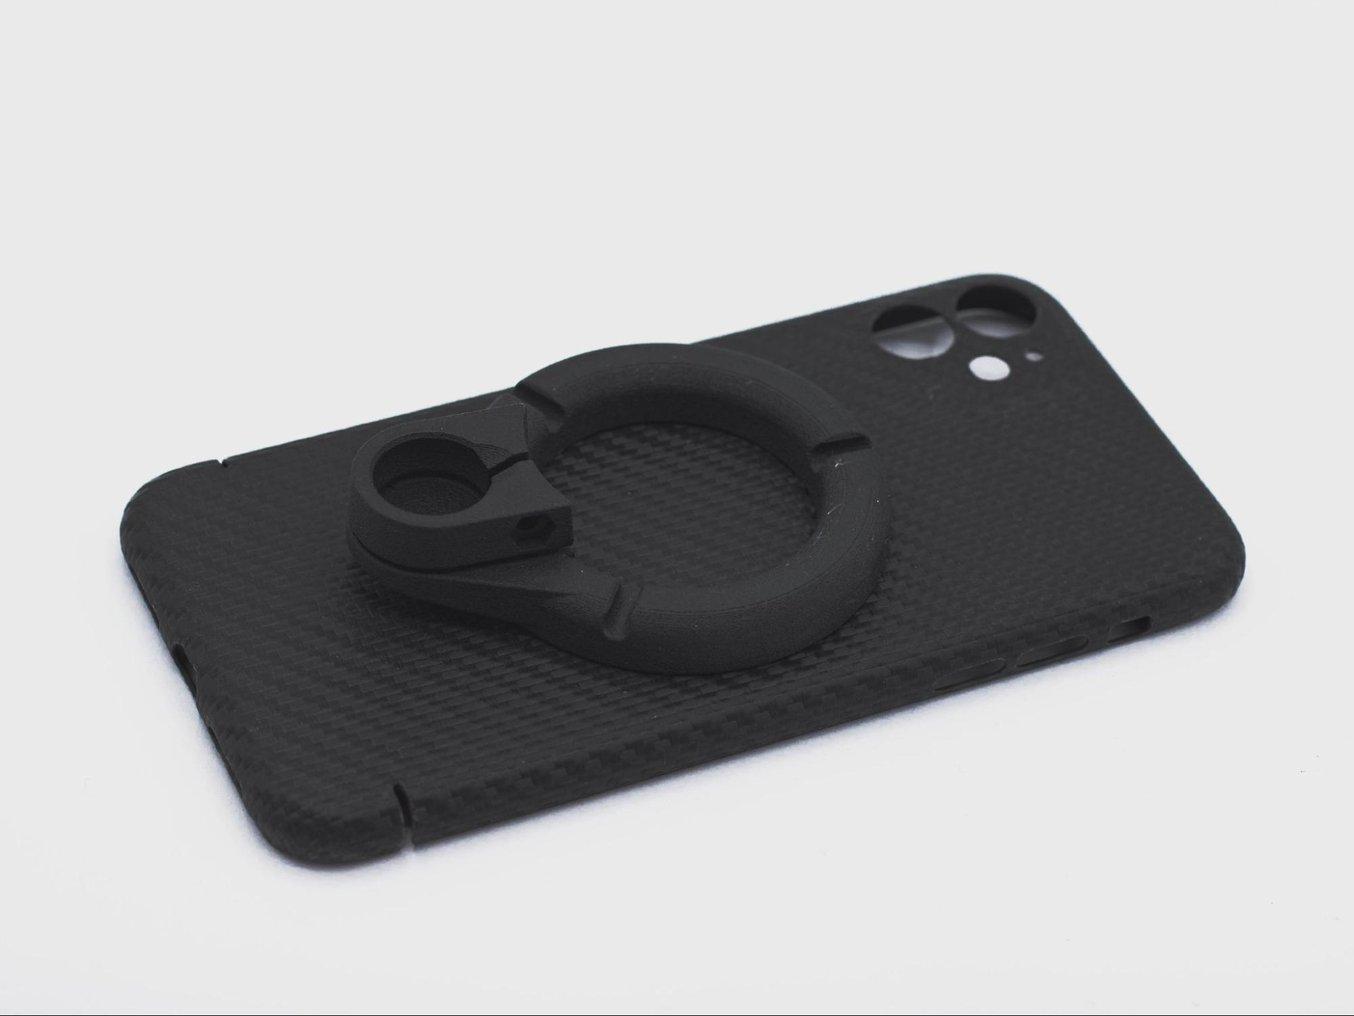 Ring-shaped mobile phone mount by Filono printed using Nylon 12 in small series.